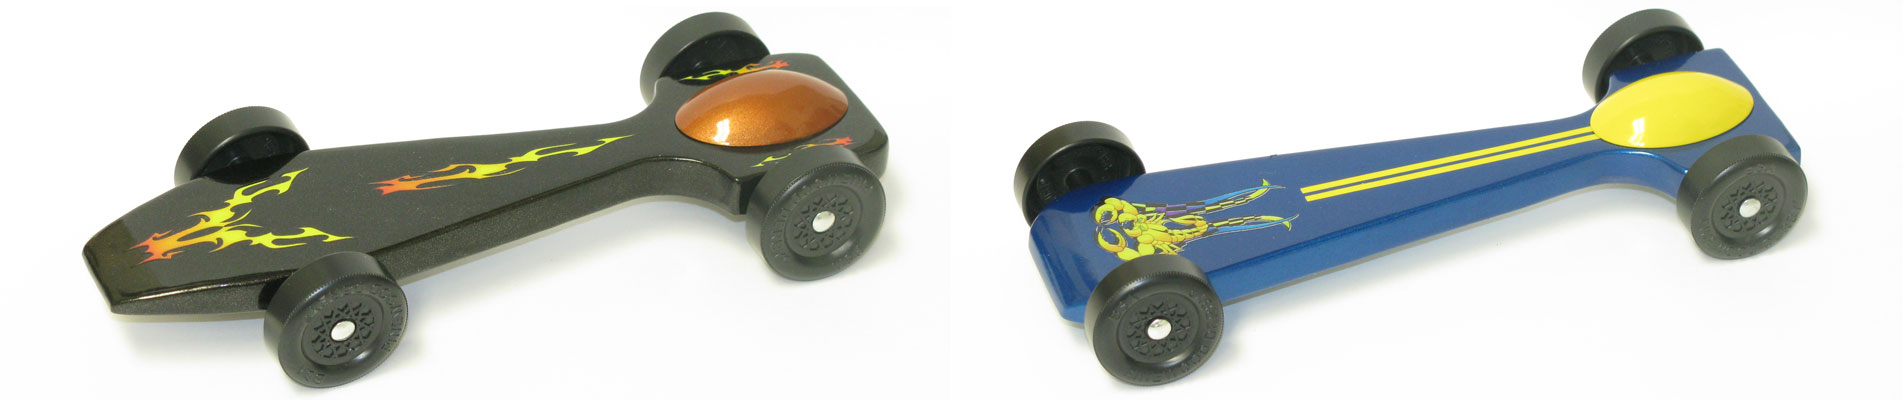 How To Airbrush a Pinewood Derby Car